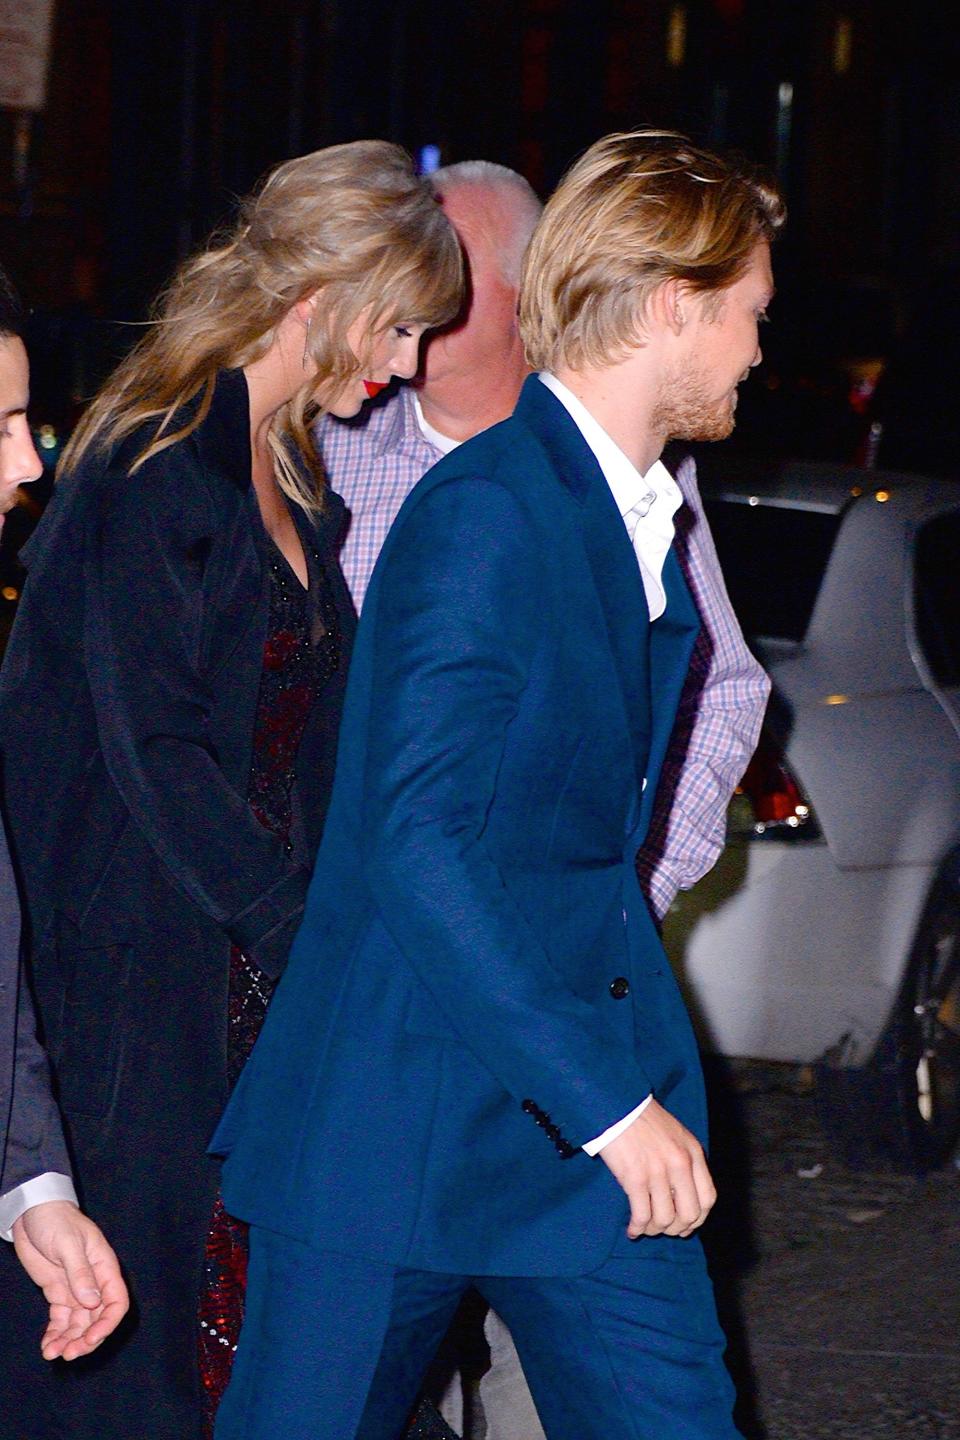 Taylor Swift and Joe Alwyn attended the actor's premiere of his new movie and then got caught by cameras leaving the afterparty.